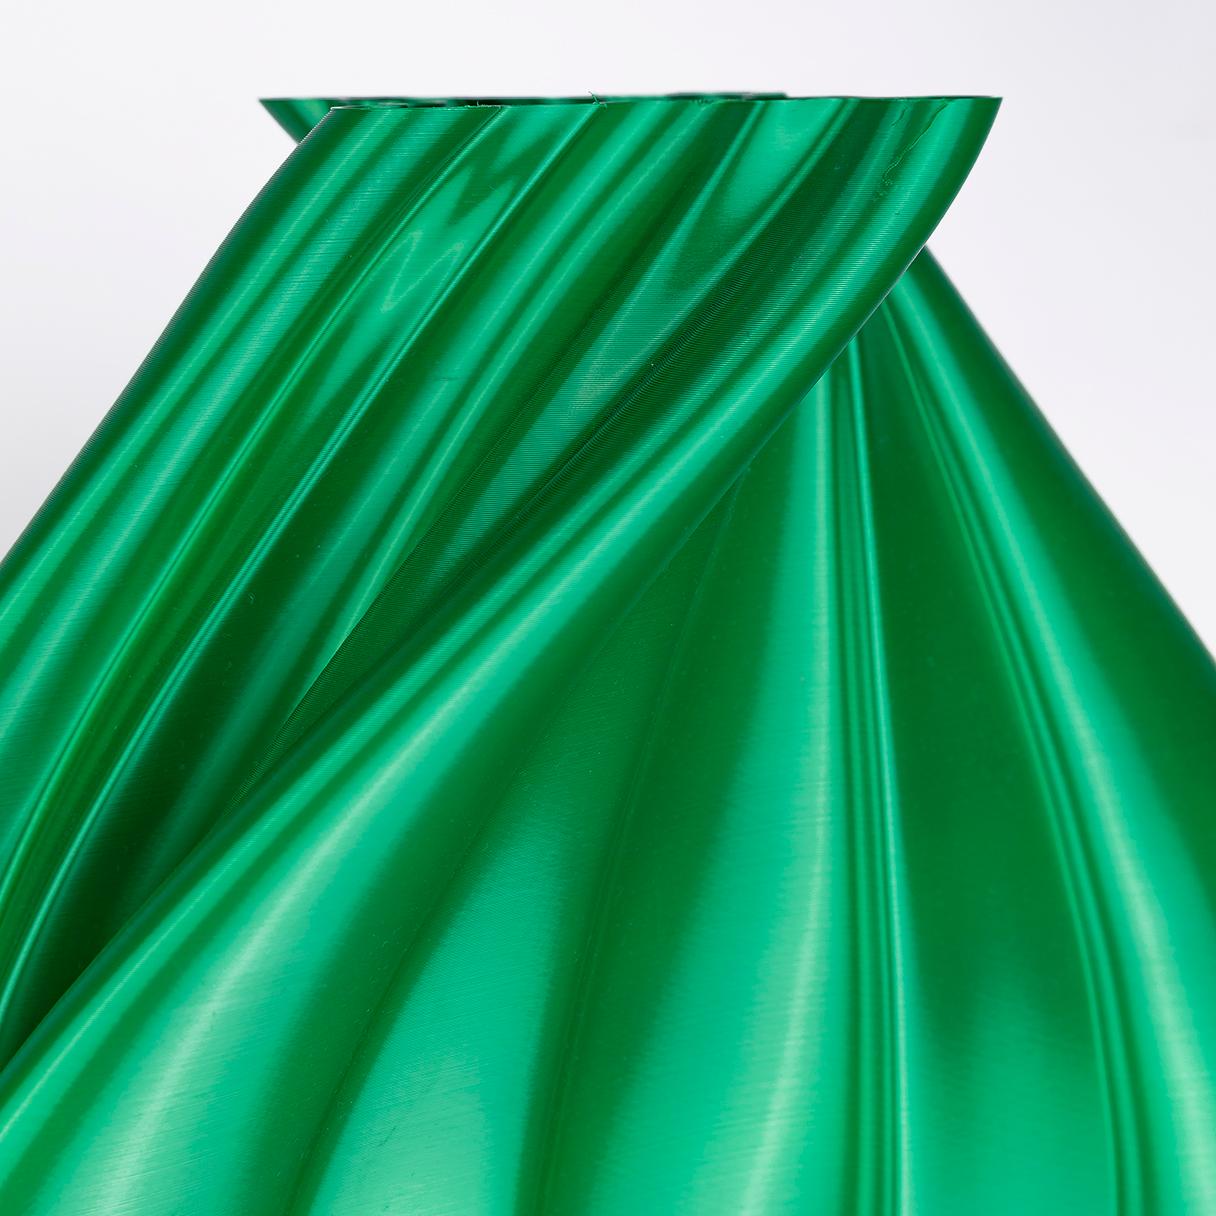 Damocle, Green Contemporary Sustainable Vase-Sculpture 1